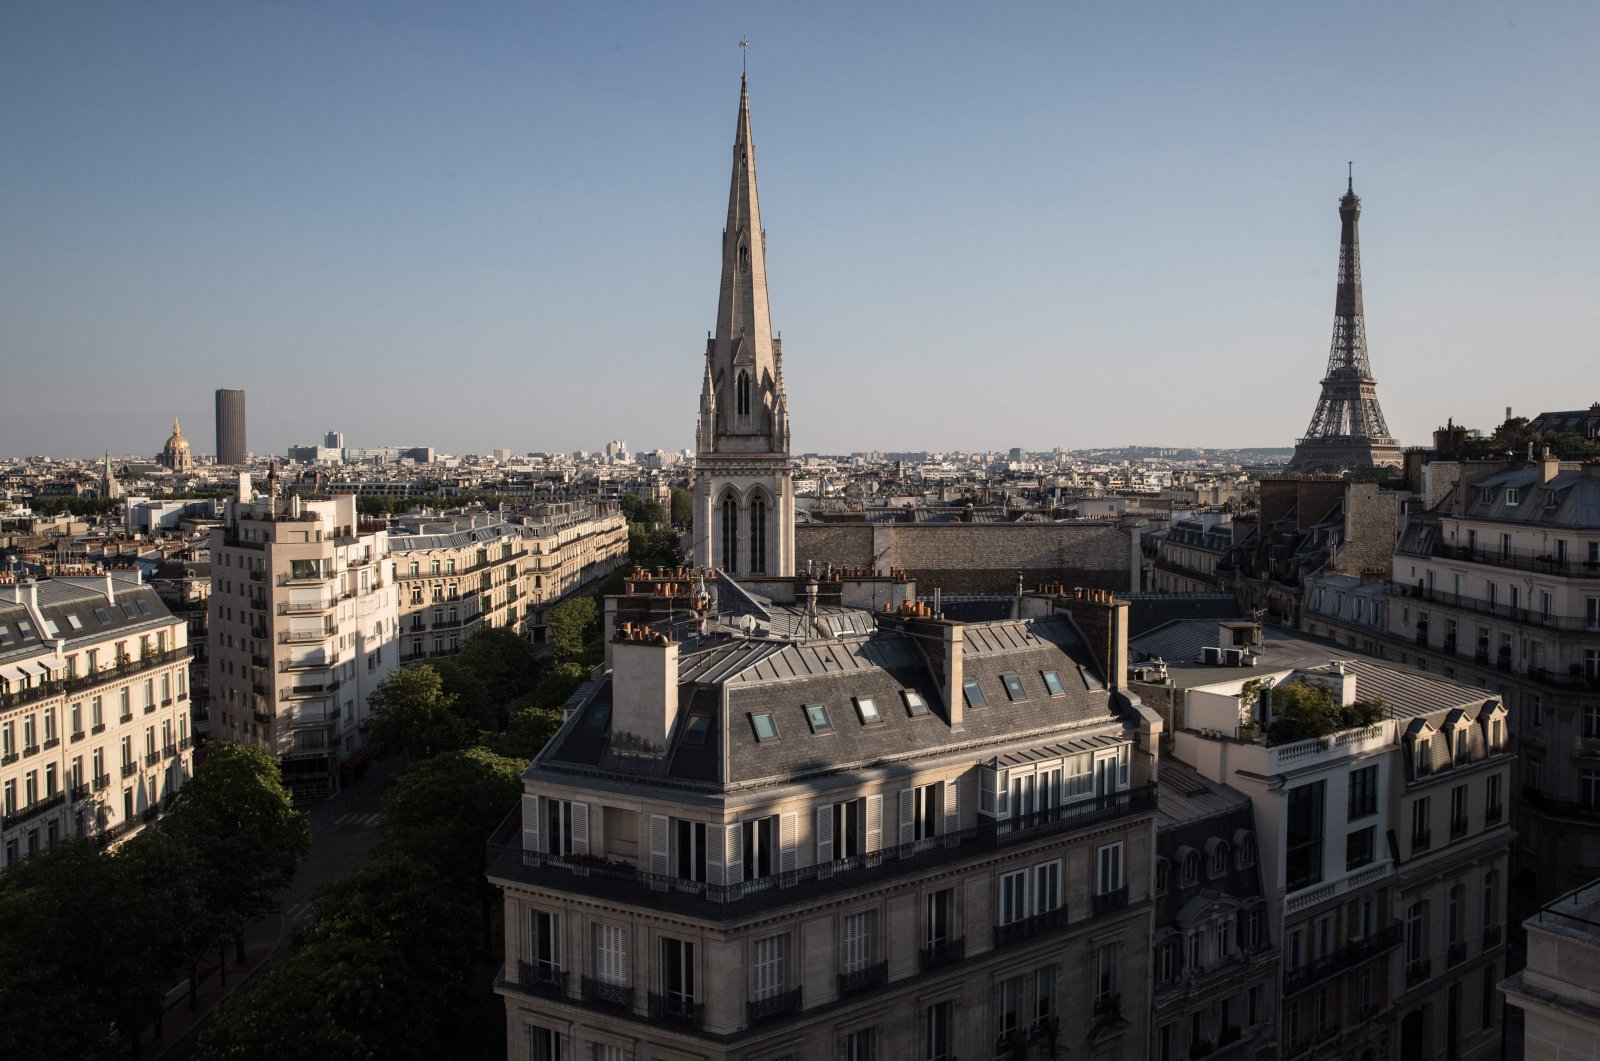 This picture, taken on April 23, 2020, shows (From L) The Invalides, the Montparnasse tower, the American Cathedral and the Eiffel Tower, in Paris, on the 38th day of a lockdown in France aimed at curbing the spread of the COVID-19 disease, caused by the novel coronavirus. (AFP Photo)